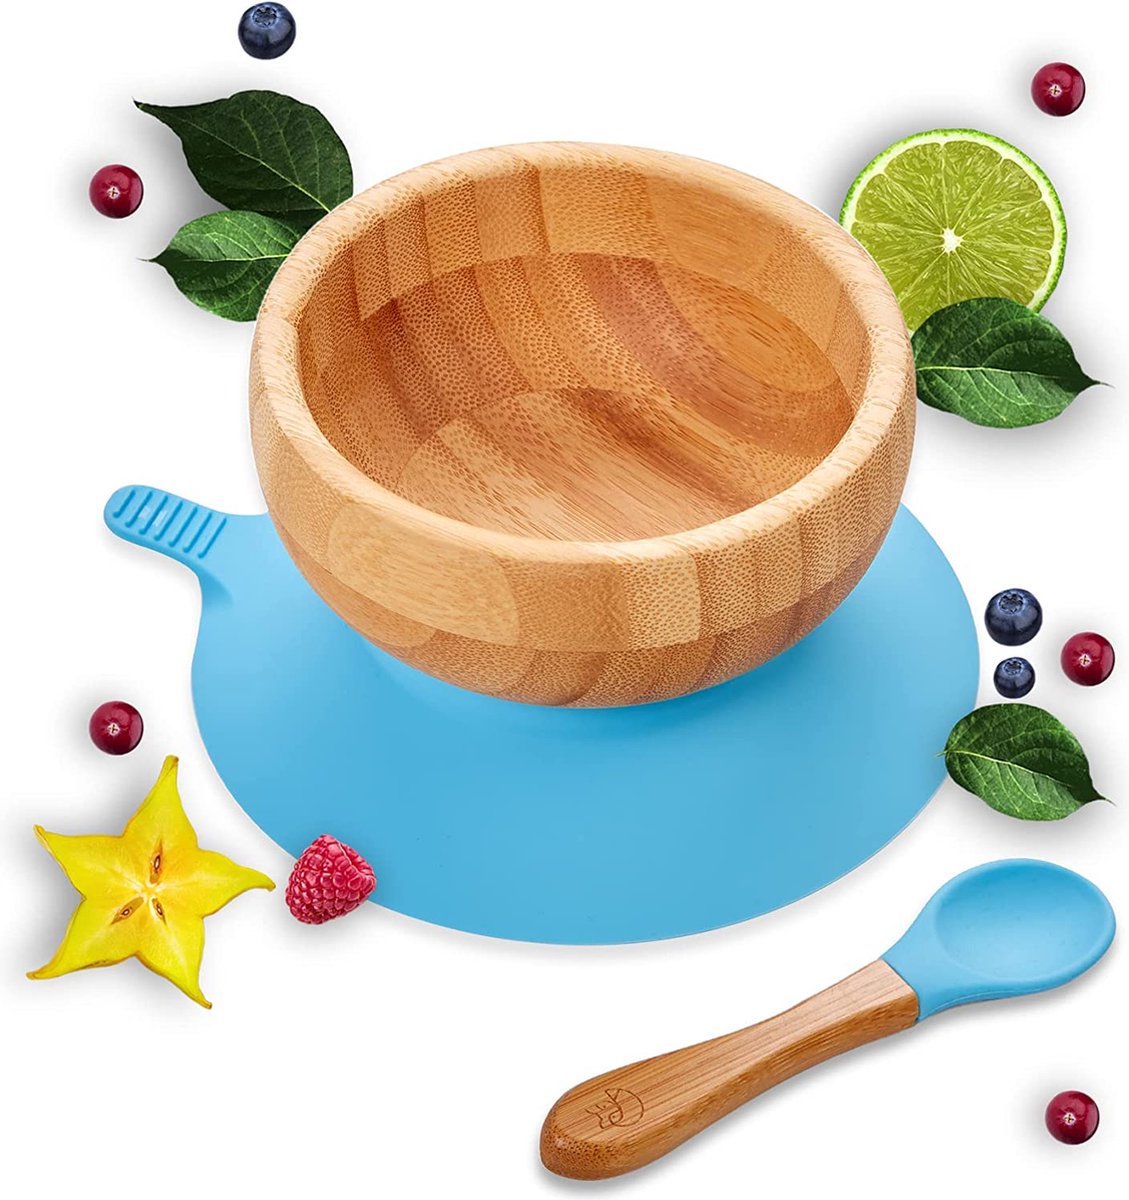 Kleiner Fuchs Baby Bowl Made of Natural Bamboo with Non-Slip Suction Cup, Bowl Set with Matching Baby Spoon, High-Quality Children's Tableware Set in a Gift Box, Base Design